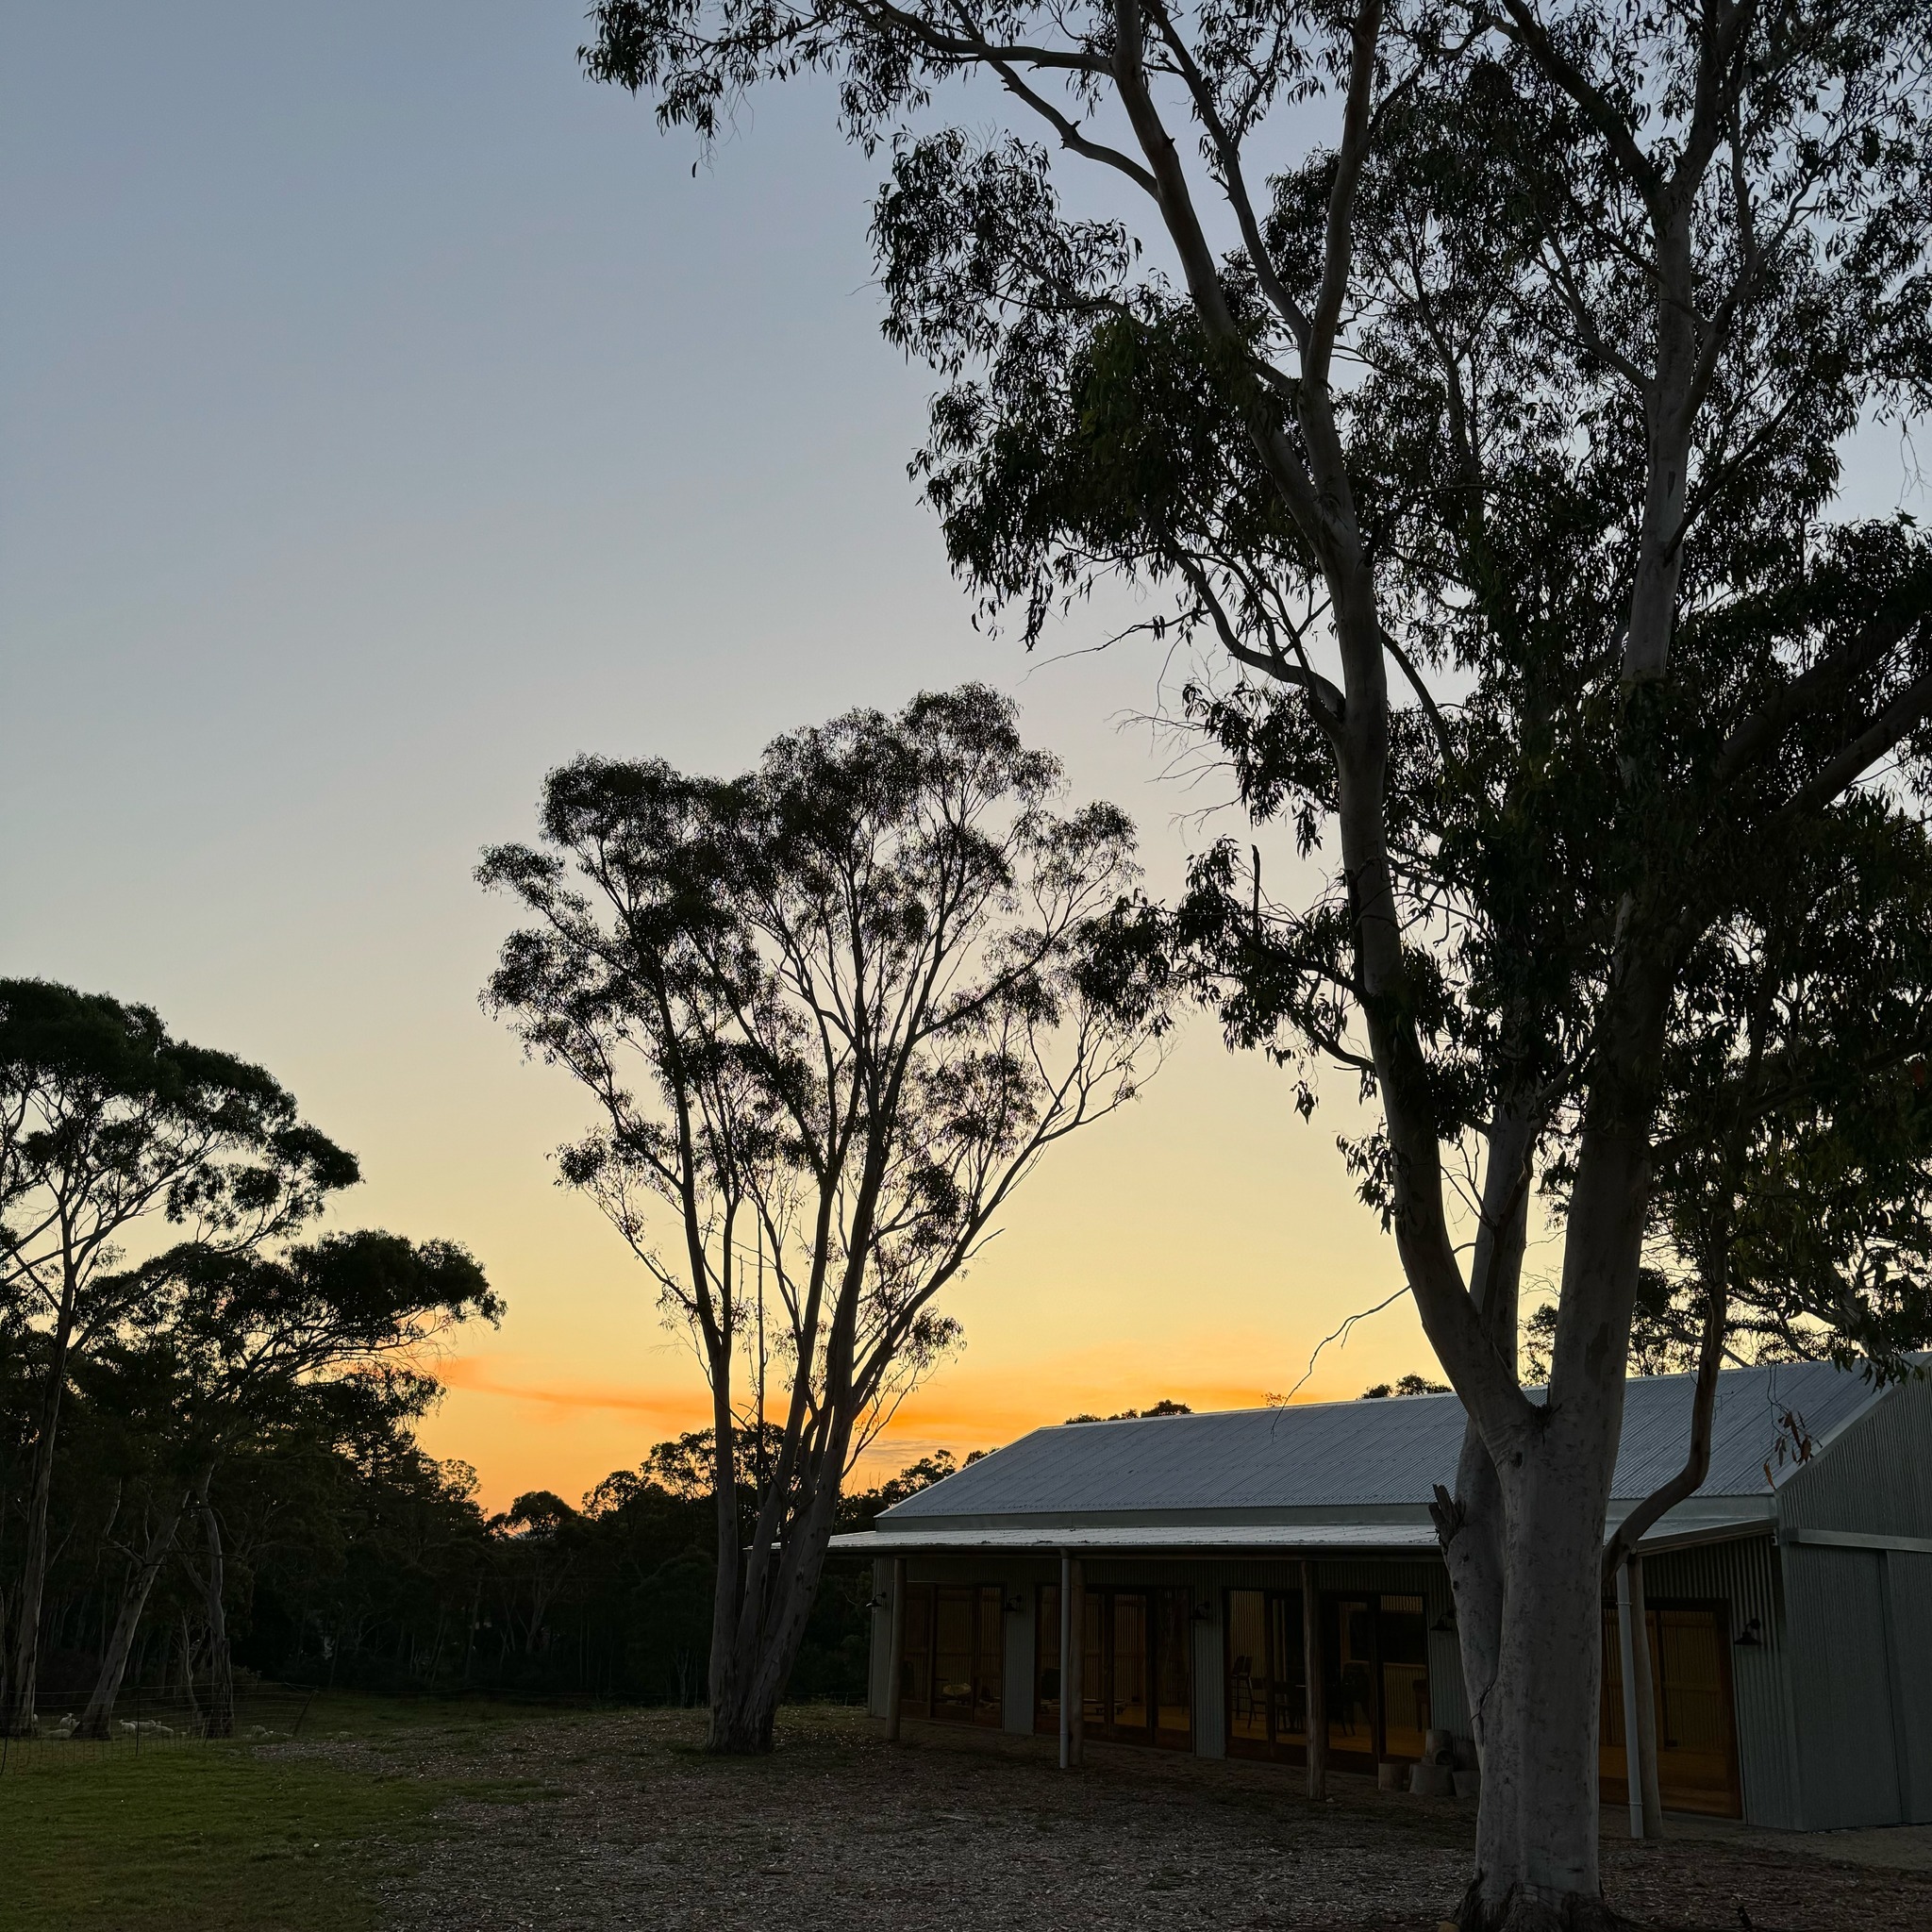 Sunset at The Old Stables 
.
.
.
.
#megalongvalley #bluemountains #werriberri #farmlife #accommodation #retreats #lot101